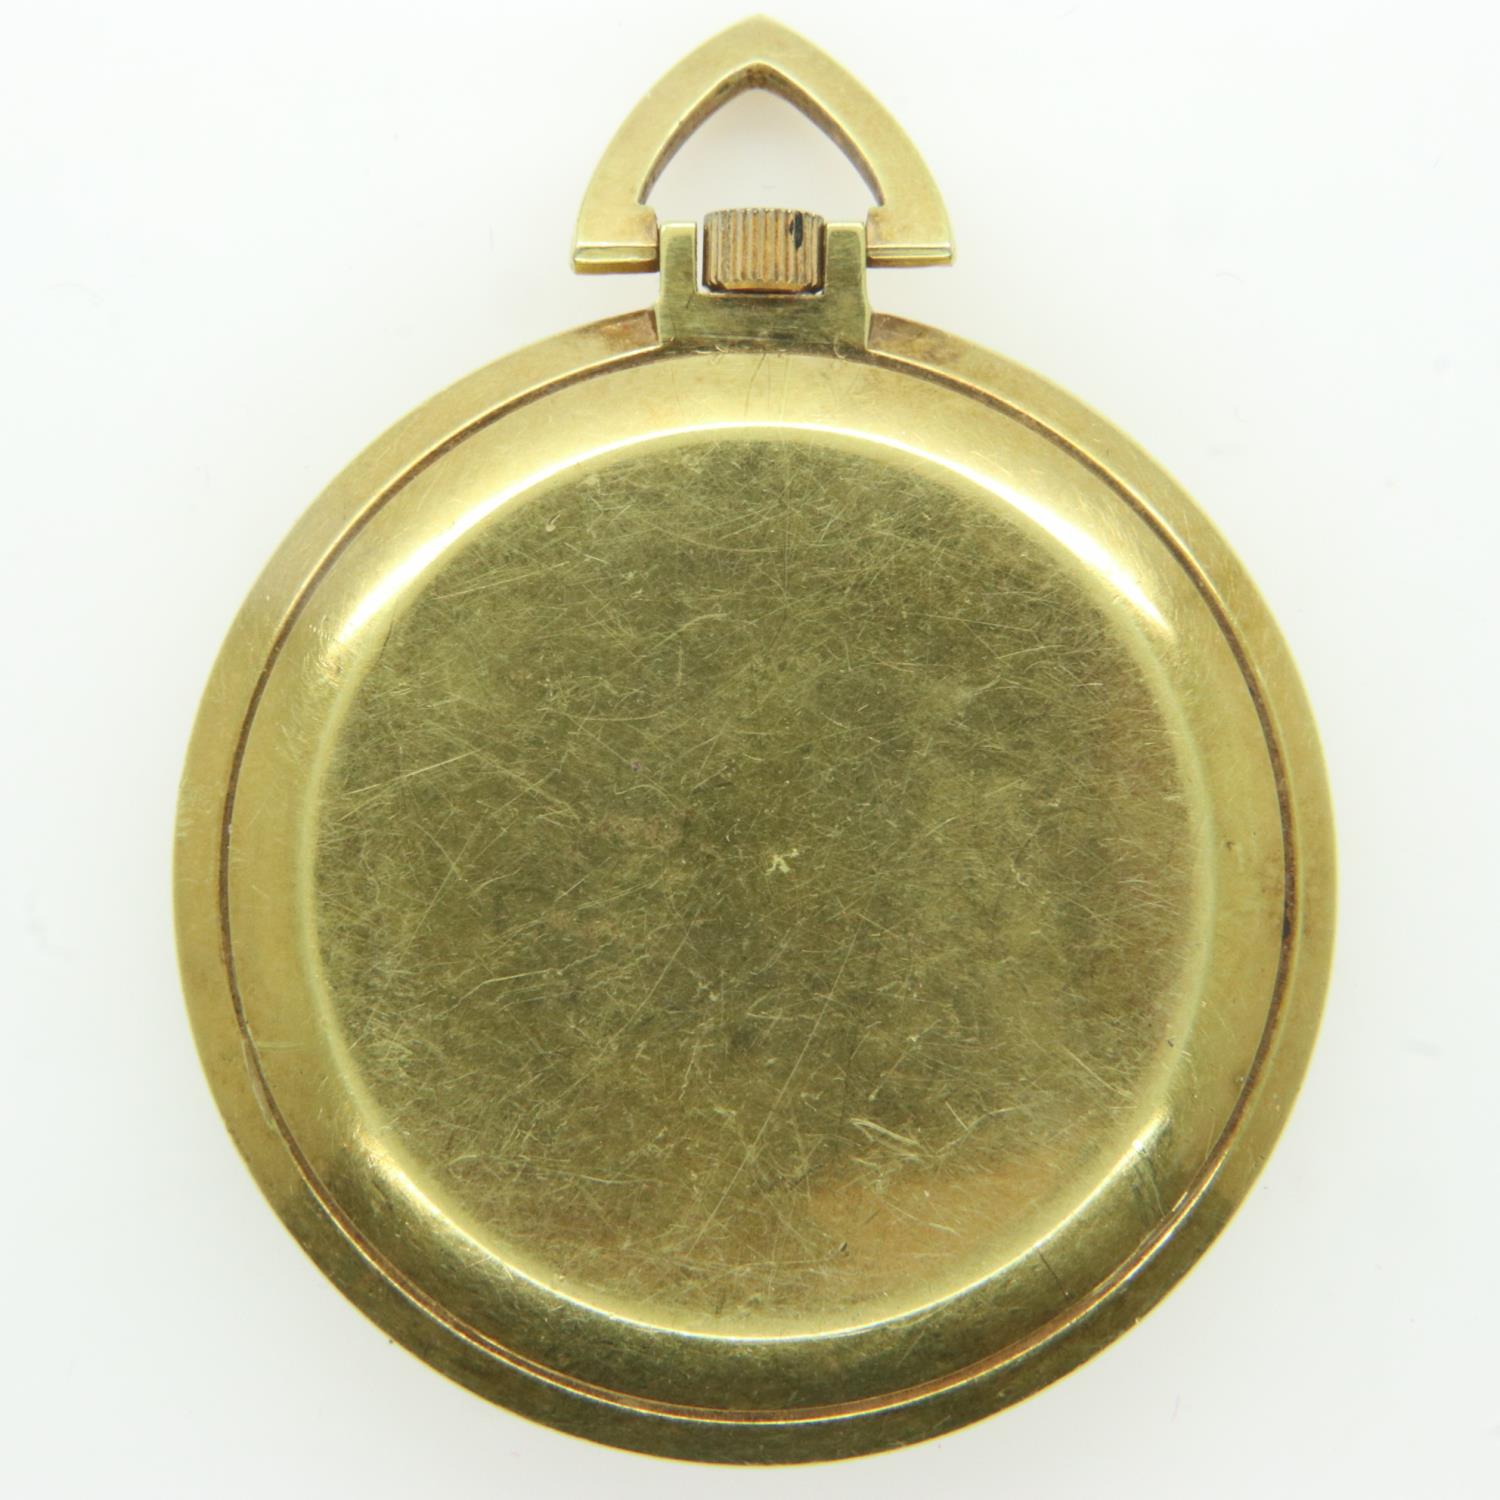 ORIOSA: open face Art Deco gold plated crown wind pocket watch, works for a short time then stops. - Image 2 of 2